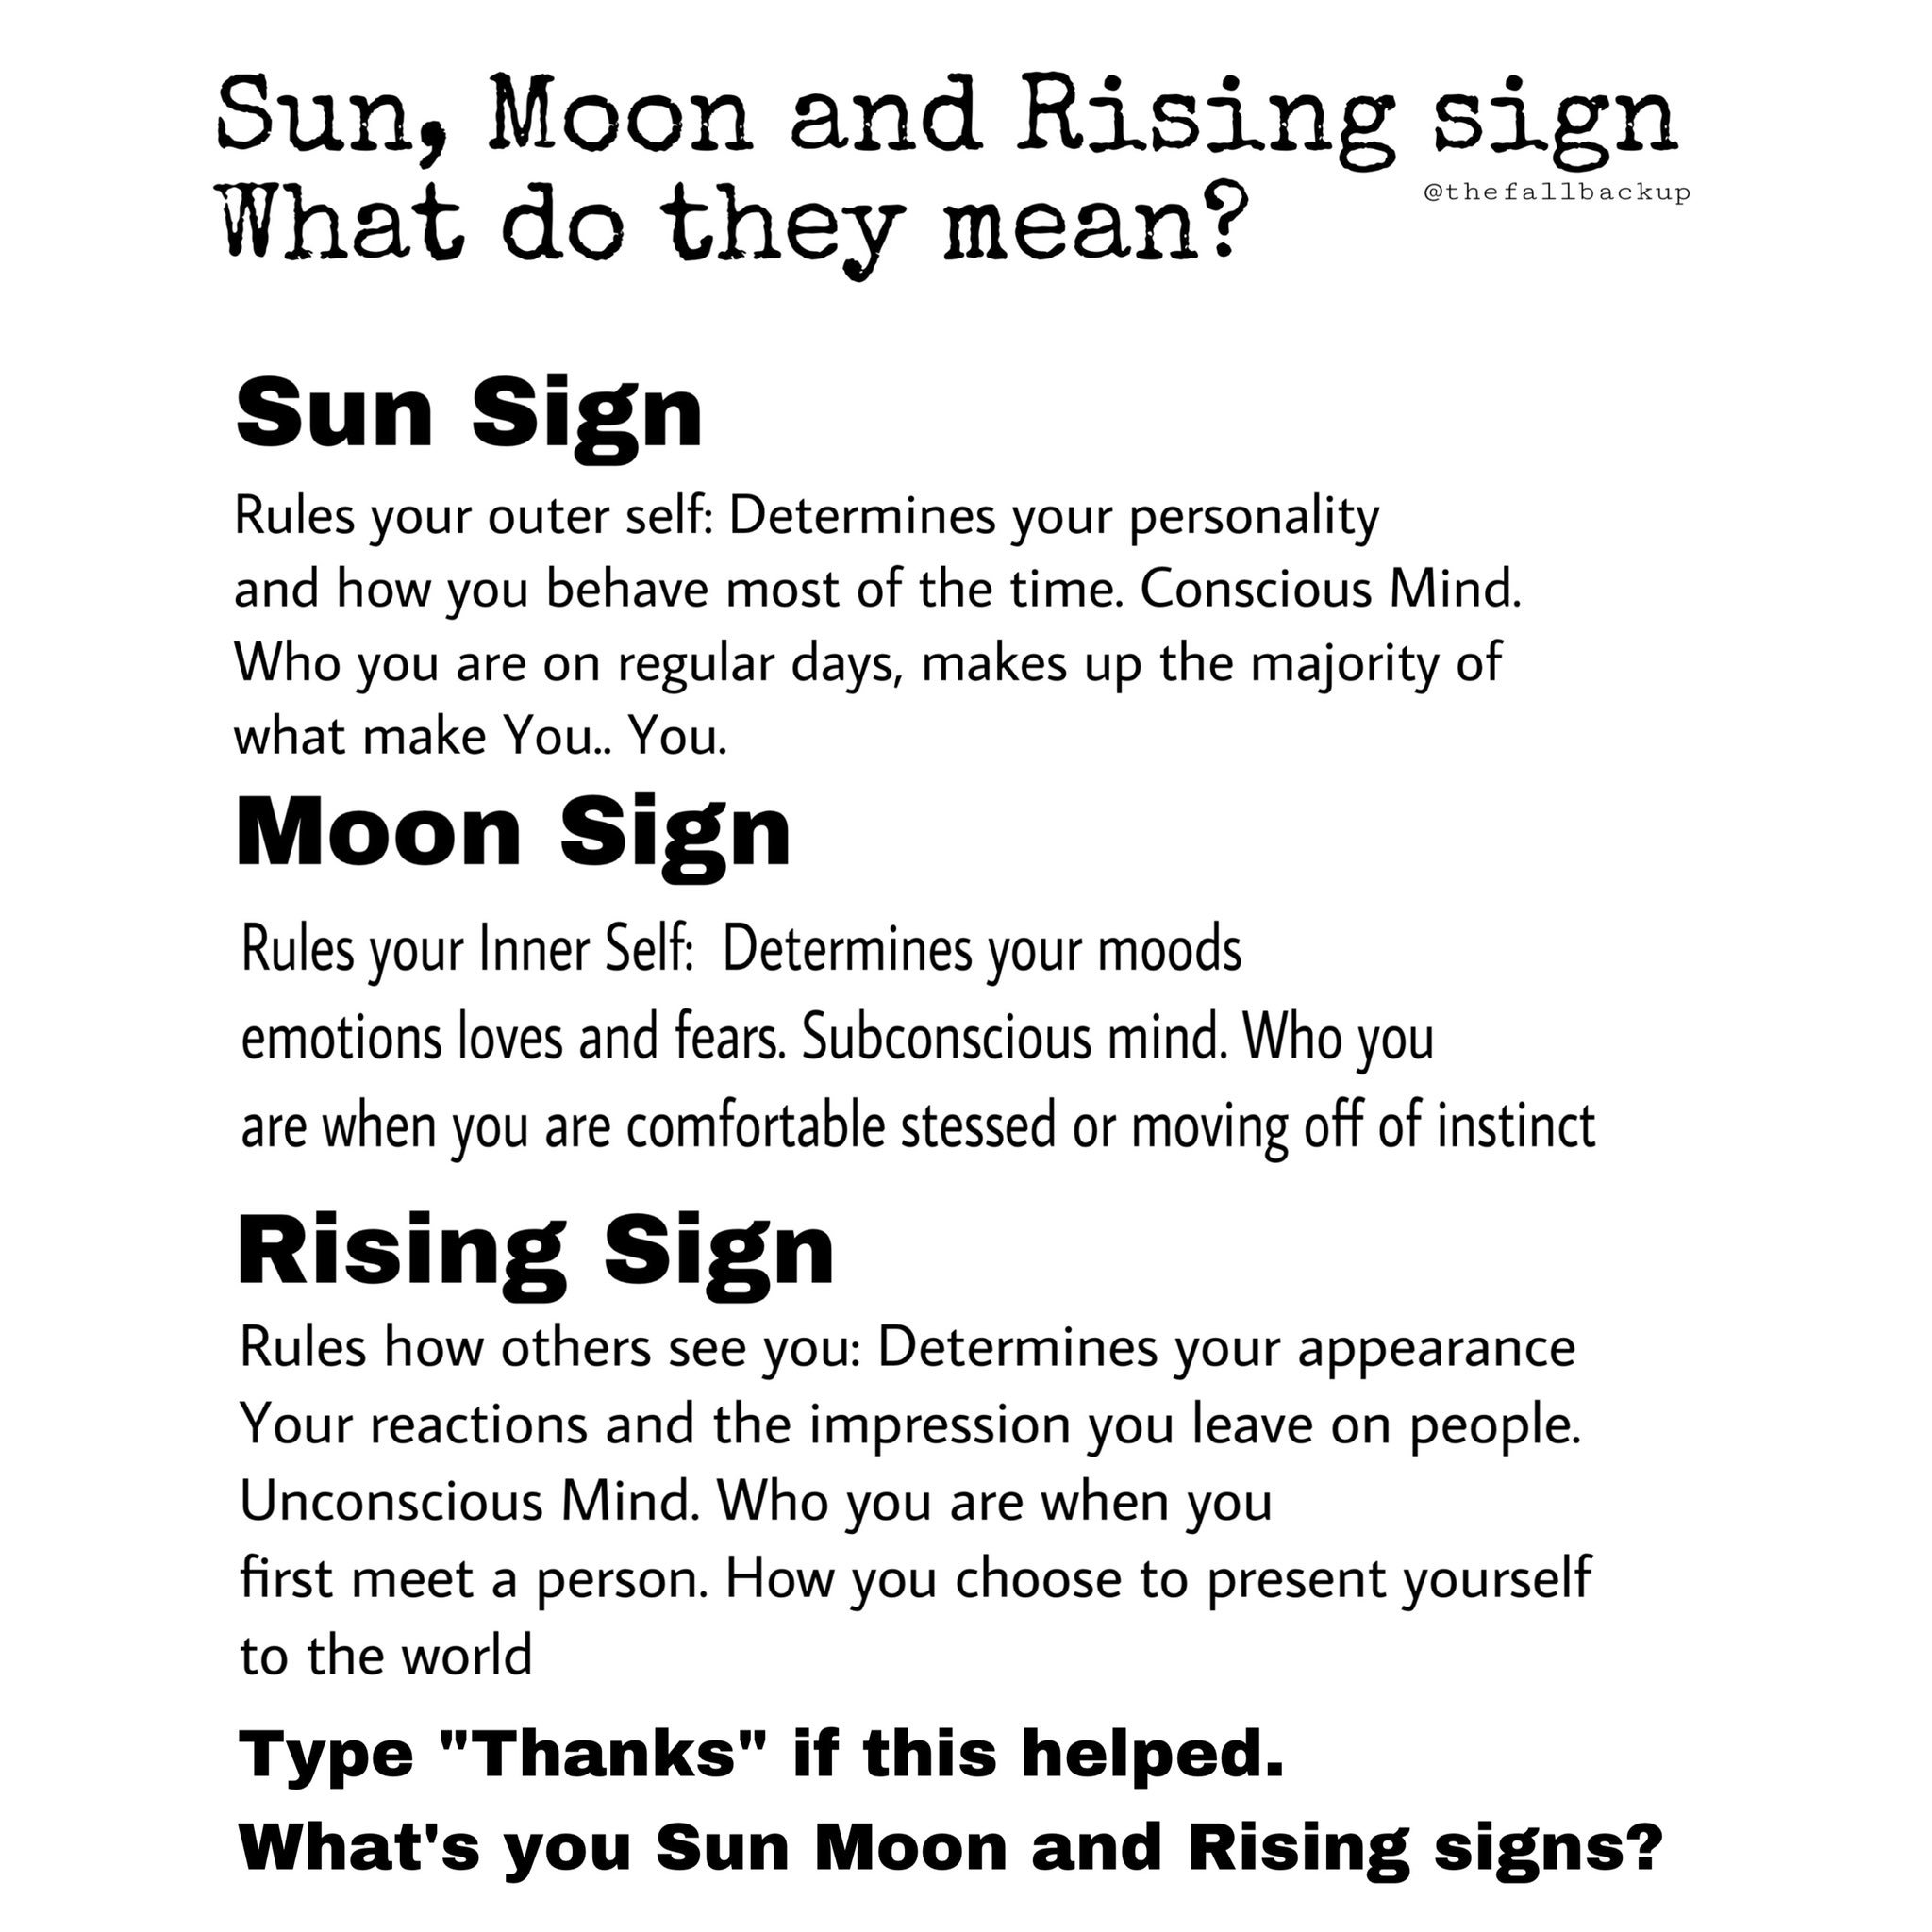 Empath ❀ on X: Here's what your Sun Moon and Rising signs mean   / X